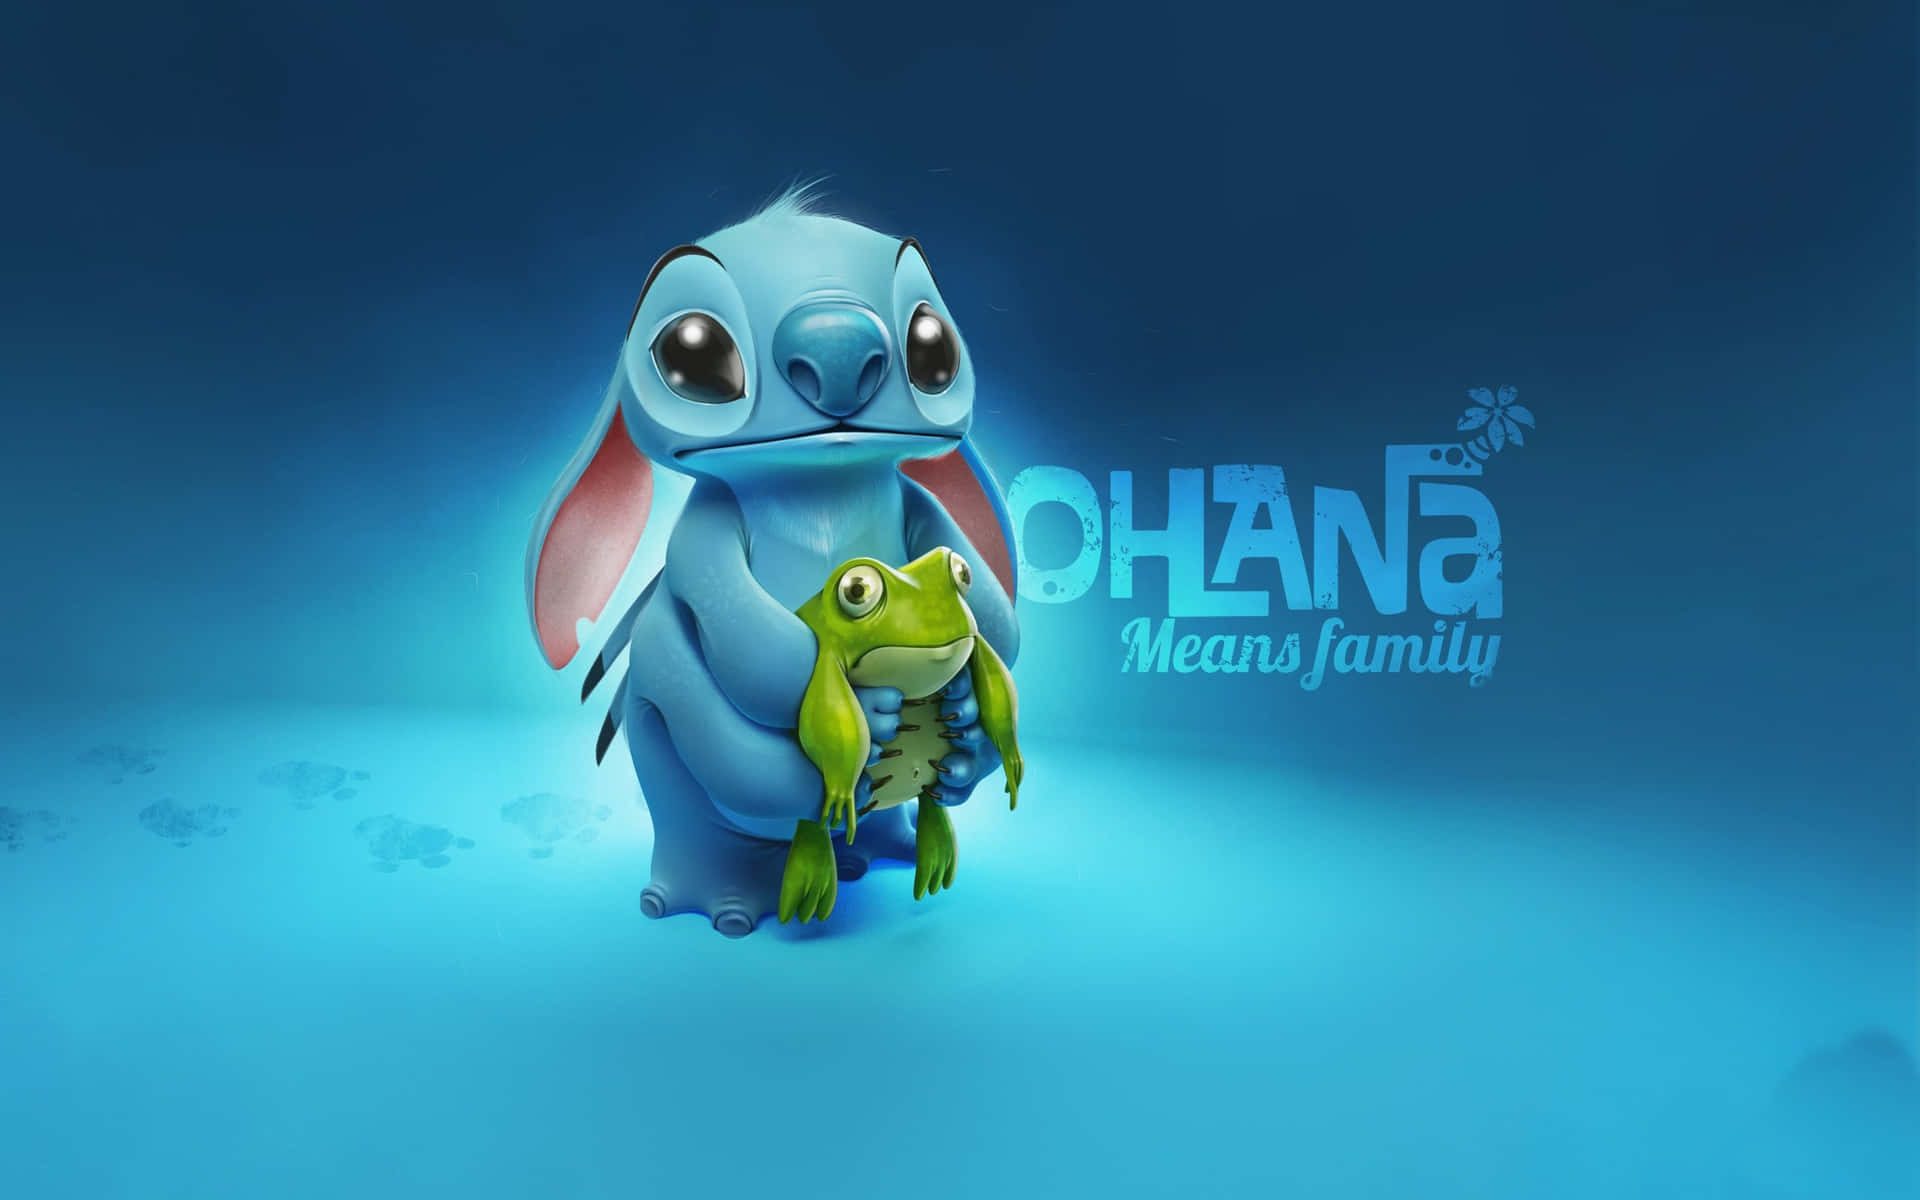 An Adorable Baby Stitch Wallpaper